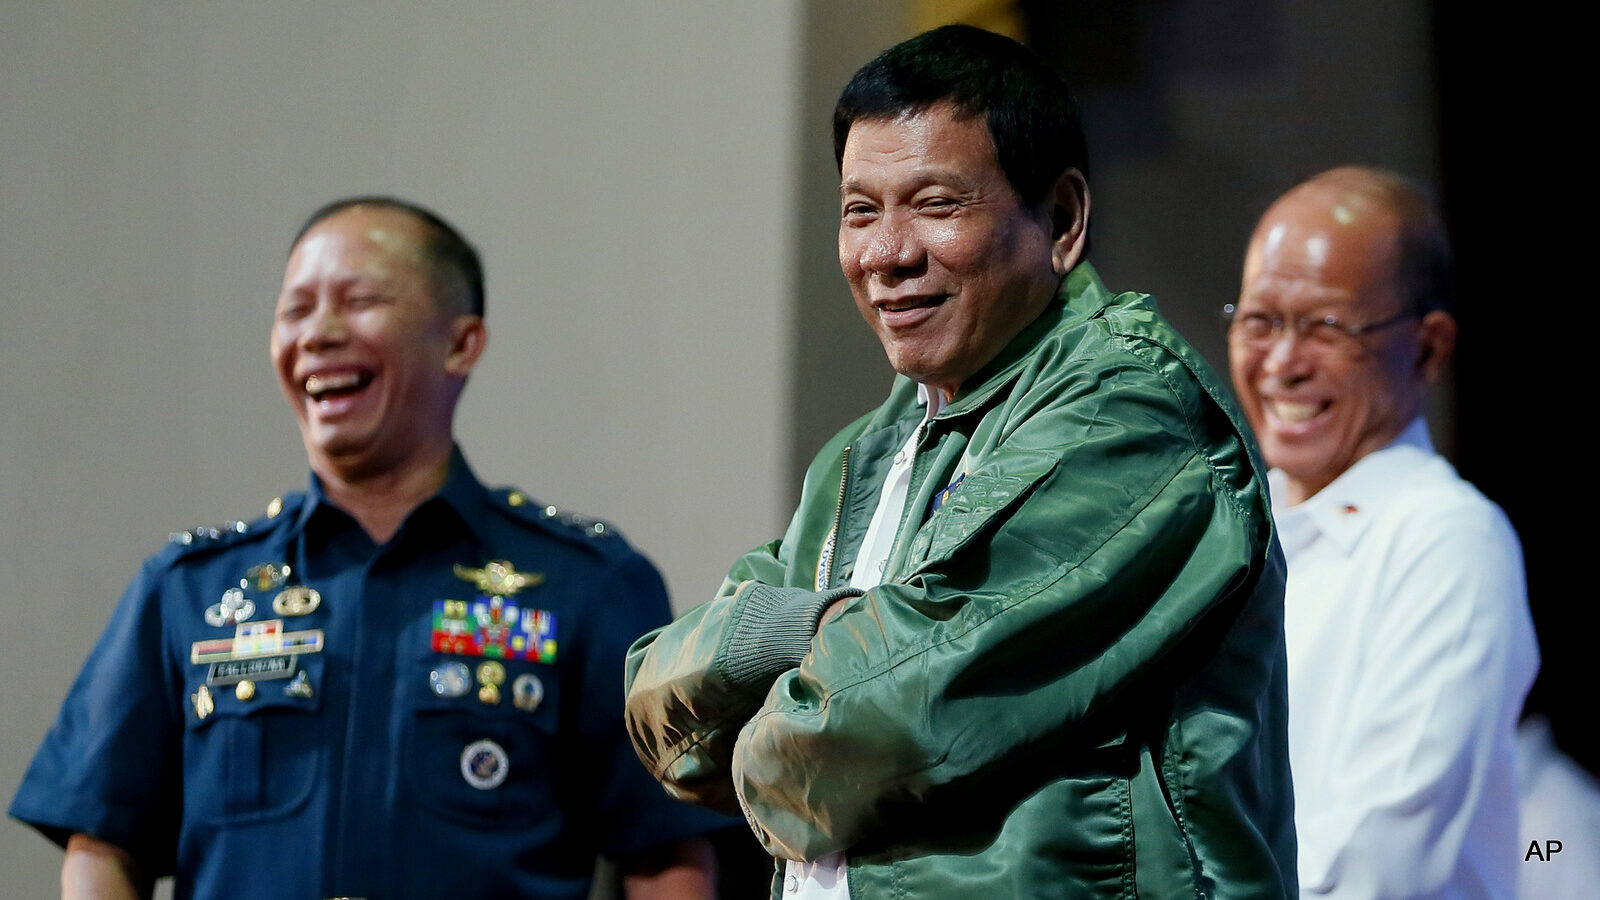 Philippine President Rodrigo Duterte wears a pilot's jacket which was presented to him during his "Talk with the Airmen" on the anniversary of the 250th Presidential Airlift Wing Tuesday, Sept. 13, 2016 at the Philippine Air Force headquarters in suburban Pasay city, southeast of Manila, Philippines.